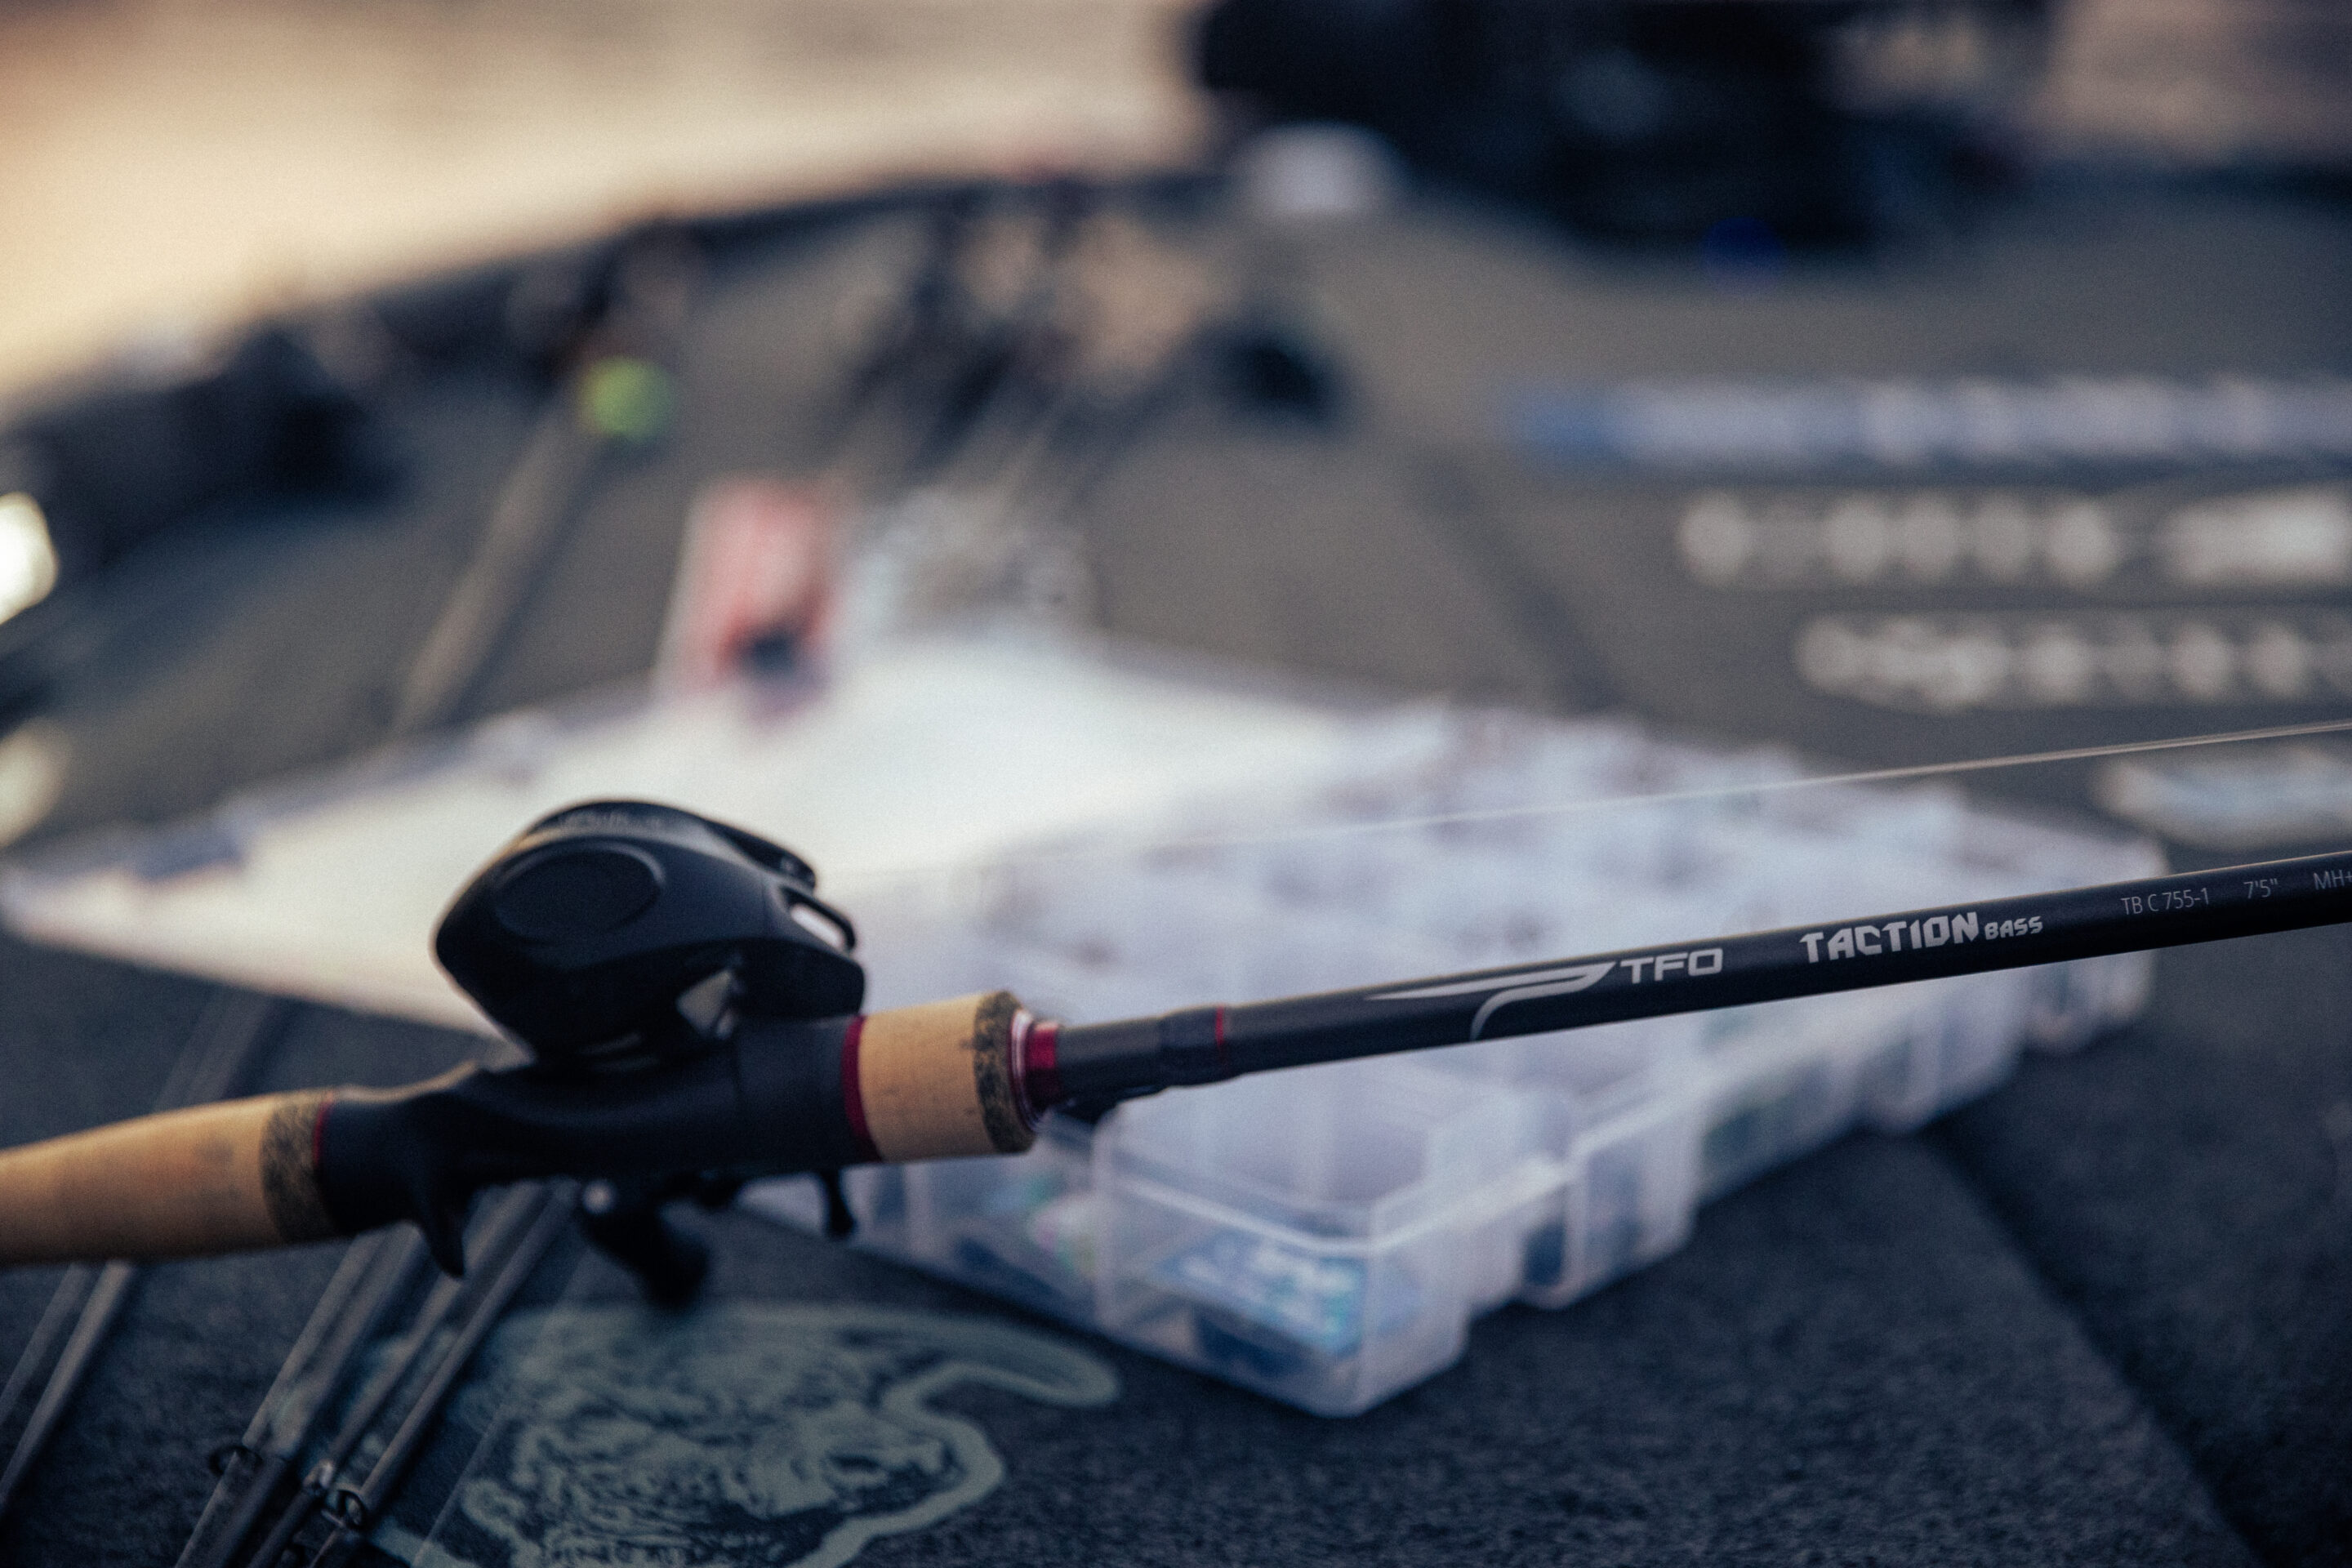 Temple Fork Outfitters Traveler Rods - TackleDirect